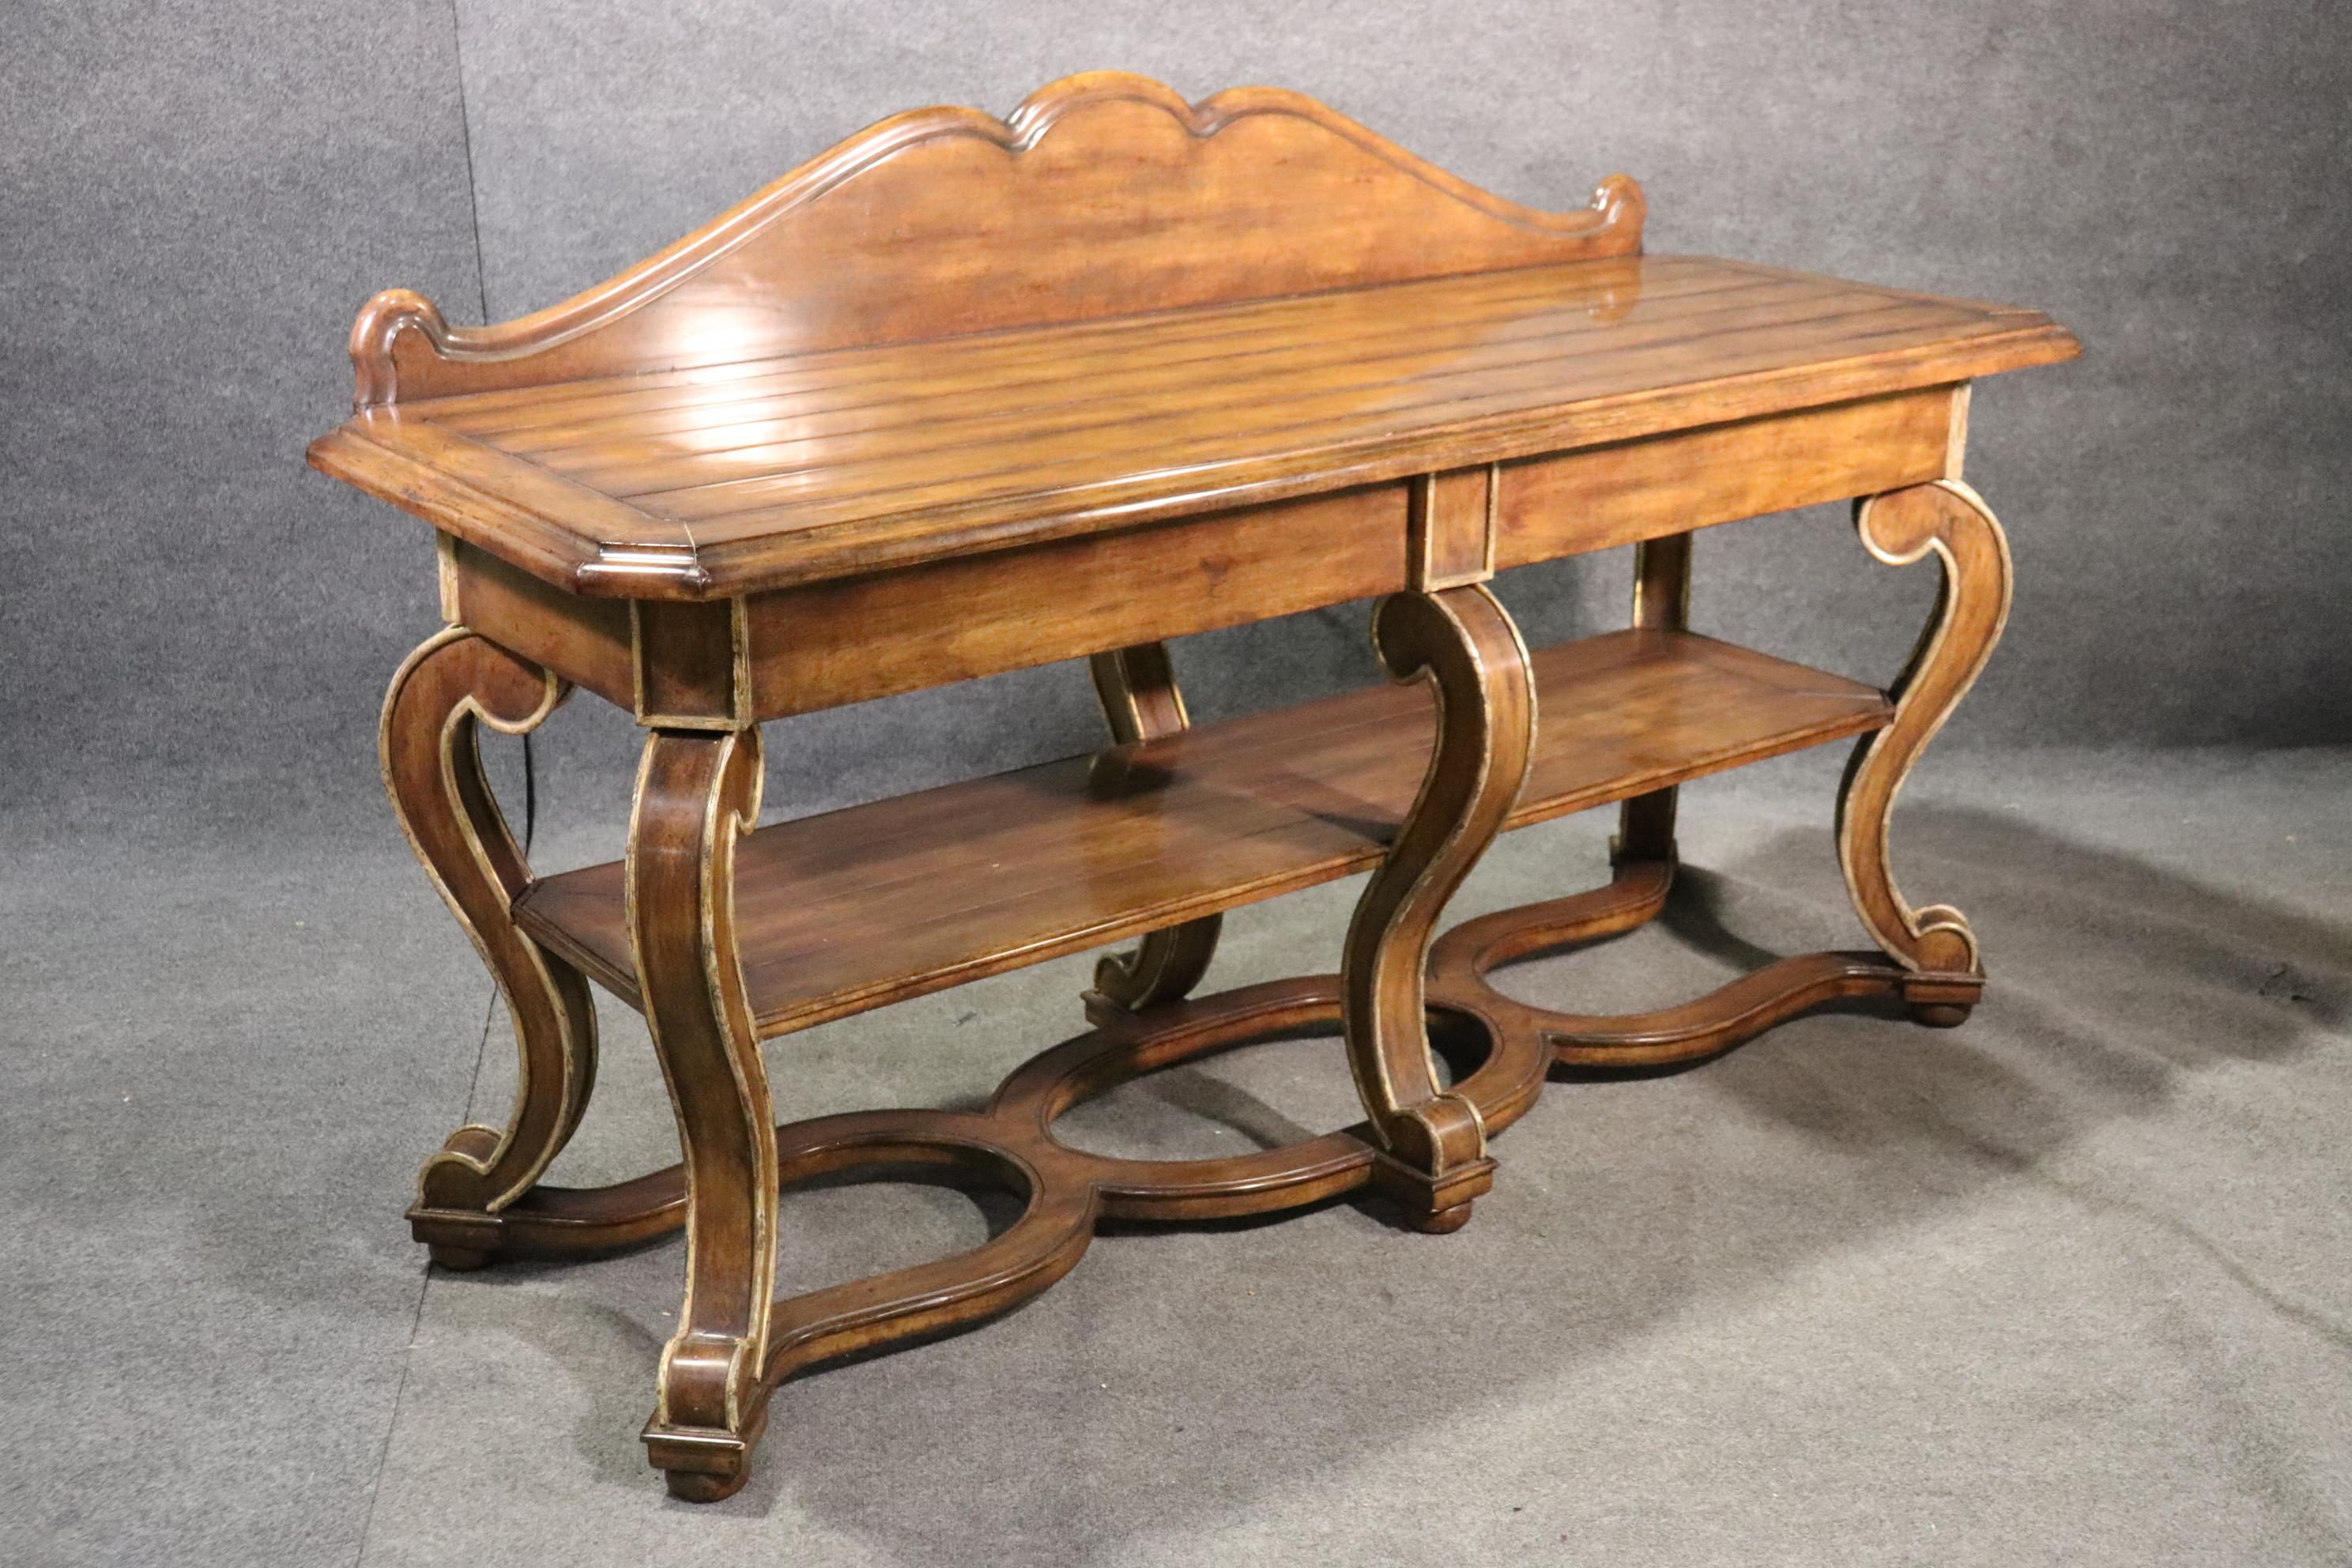 This is a beautiful Jonathan Charles walnut sideboard or console table. The table measures: 79 wide x 47 tall x 28 deep.